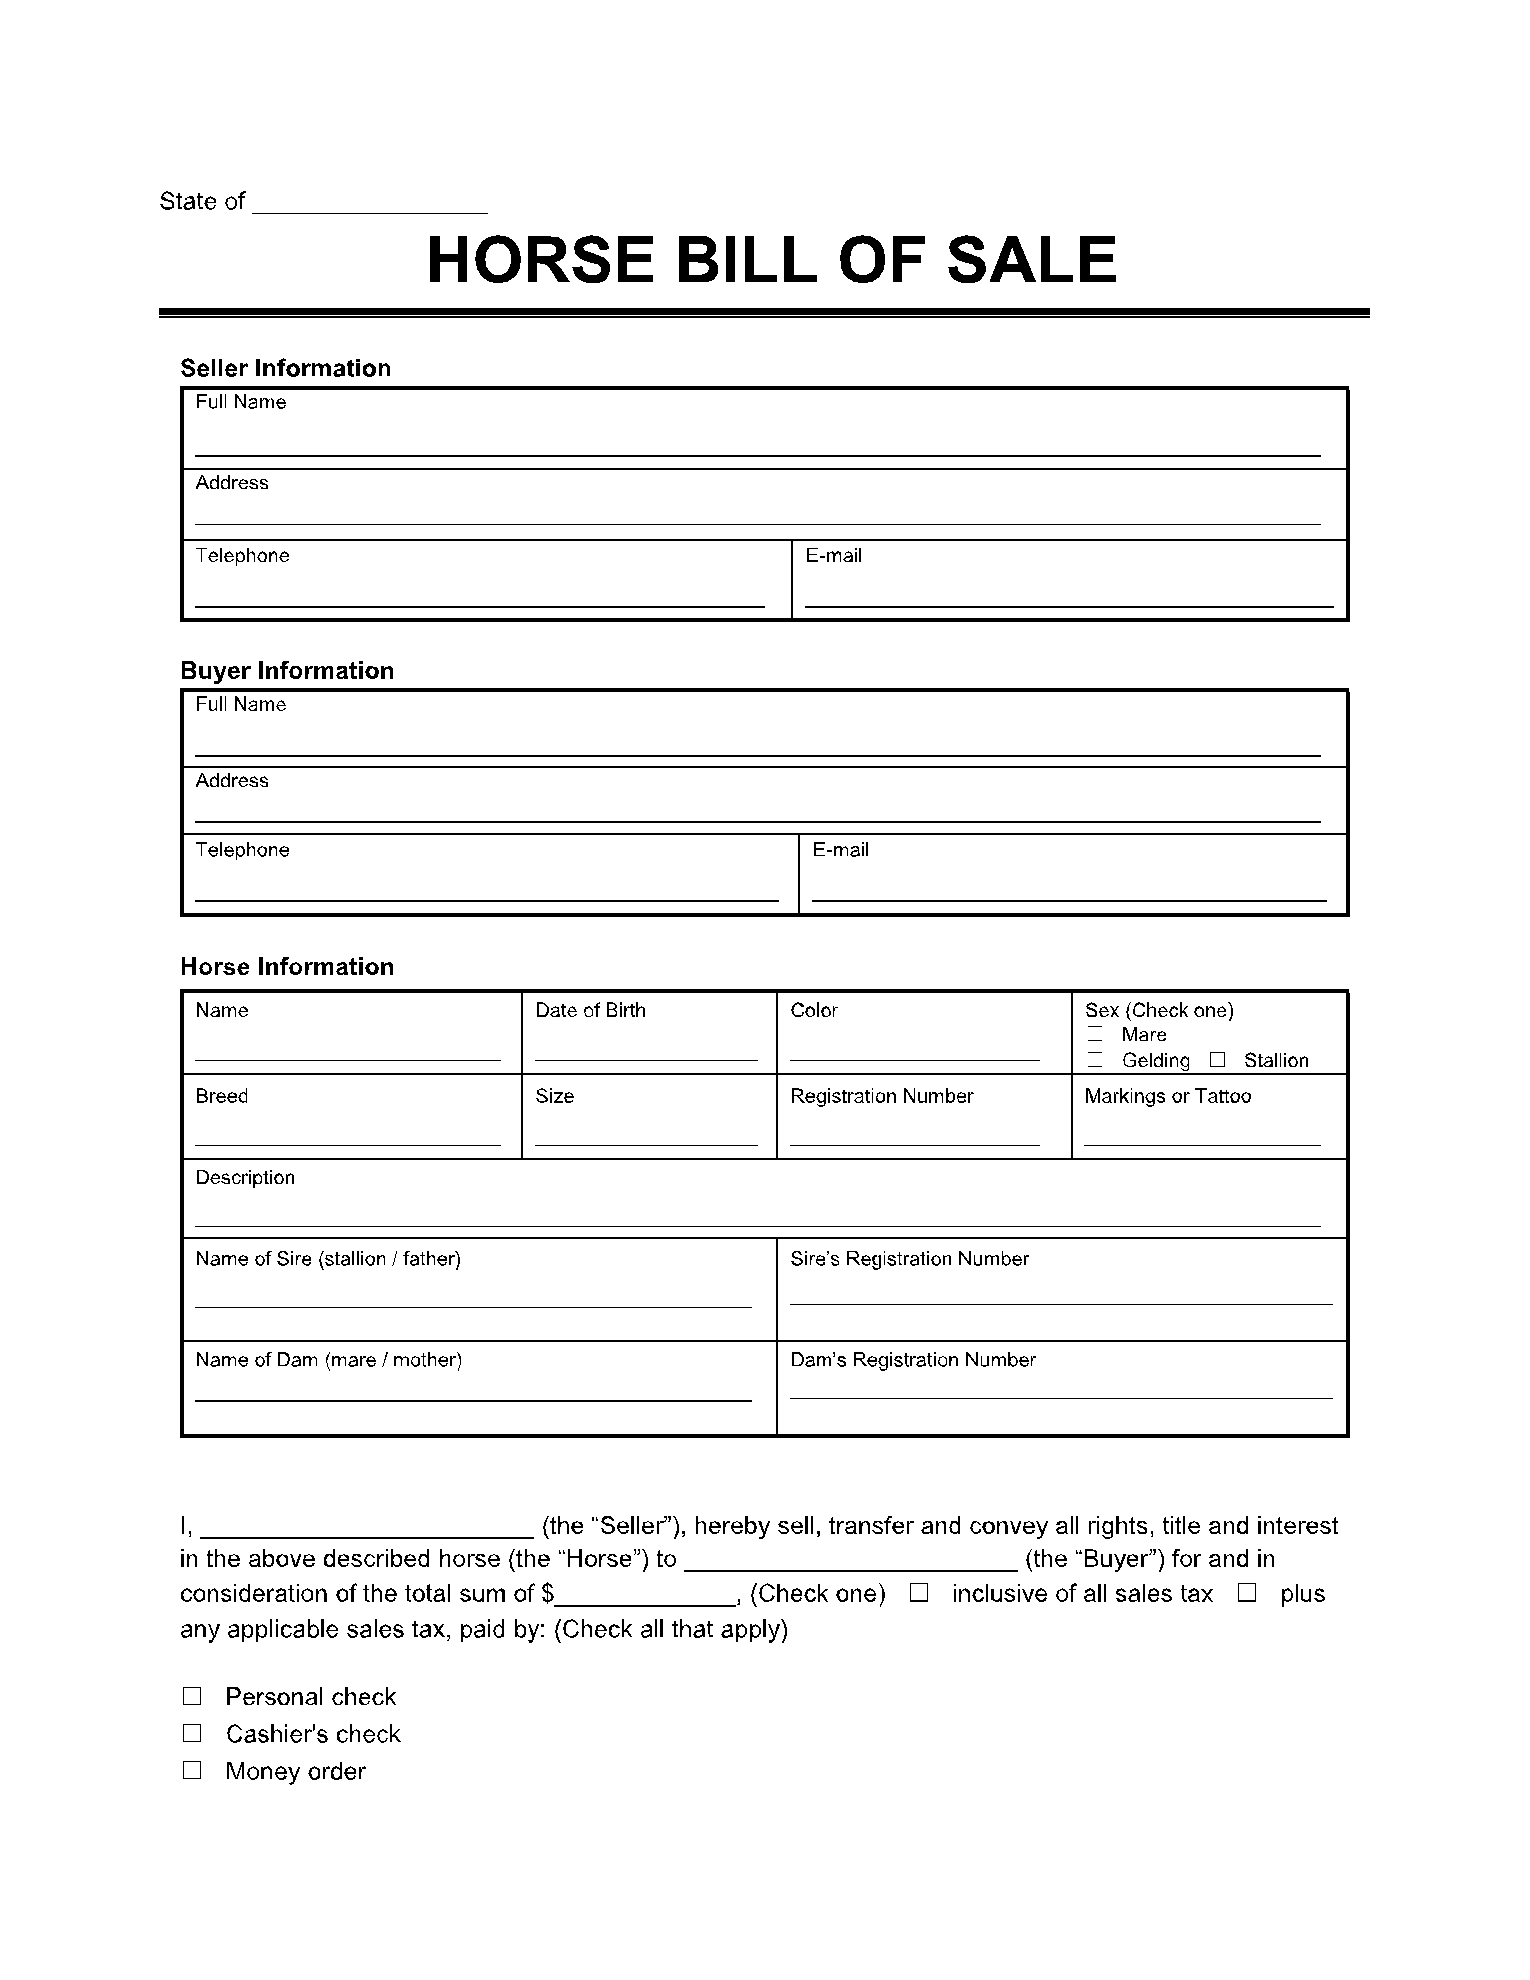 Horse (Equine) Bill of Sale Form